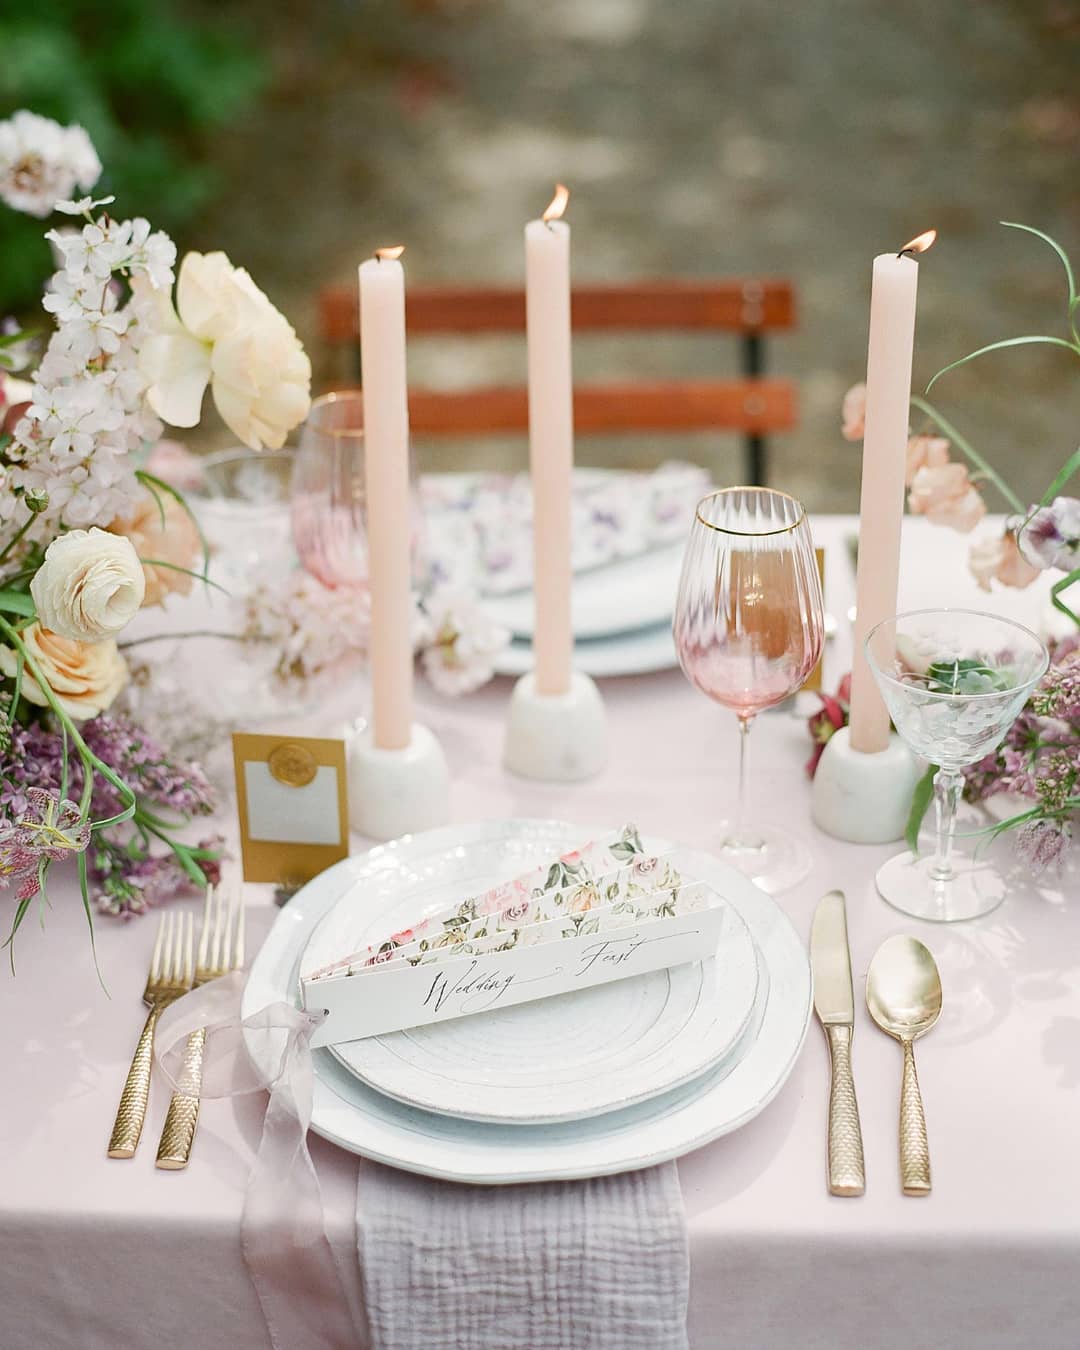 spring wedding place setting with a botanical fan menu, gossamer ribbon and textured flowers